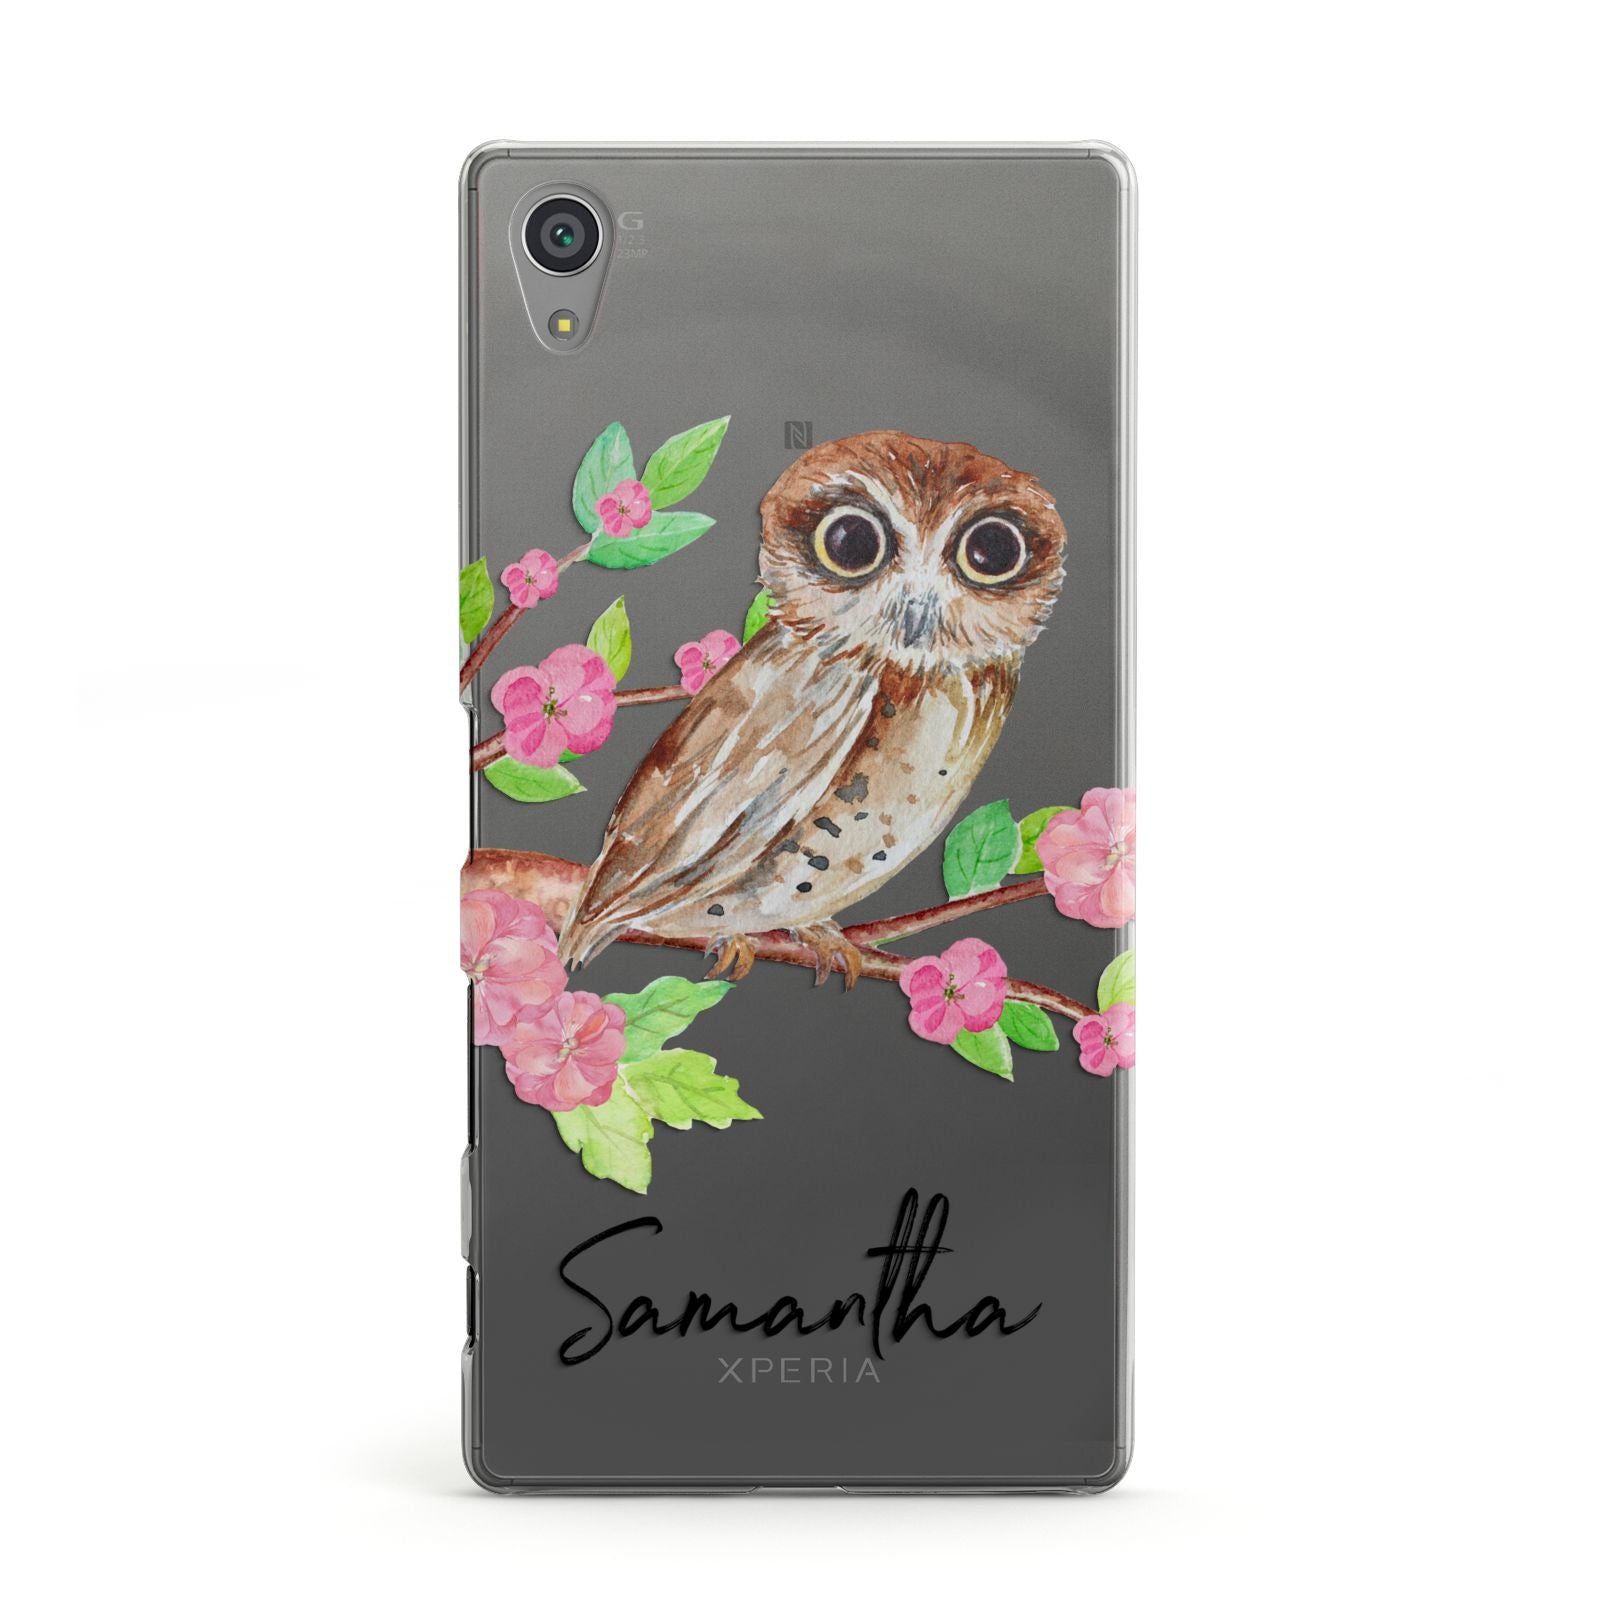 Personalised Owl Sony Xperia Case